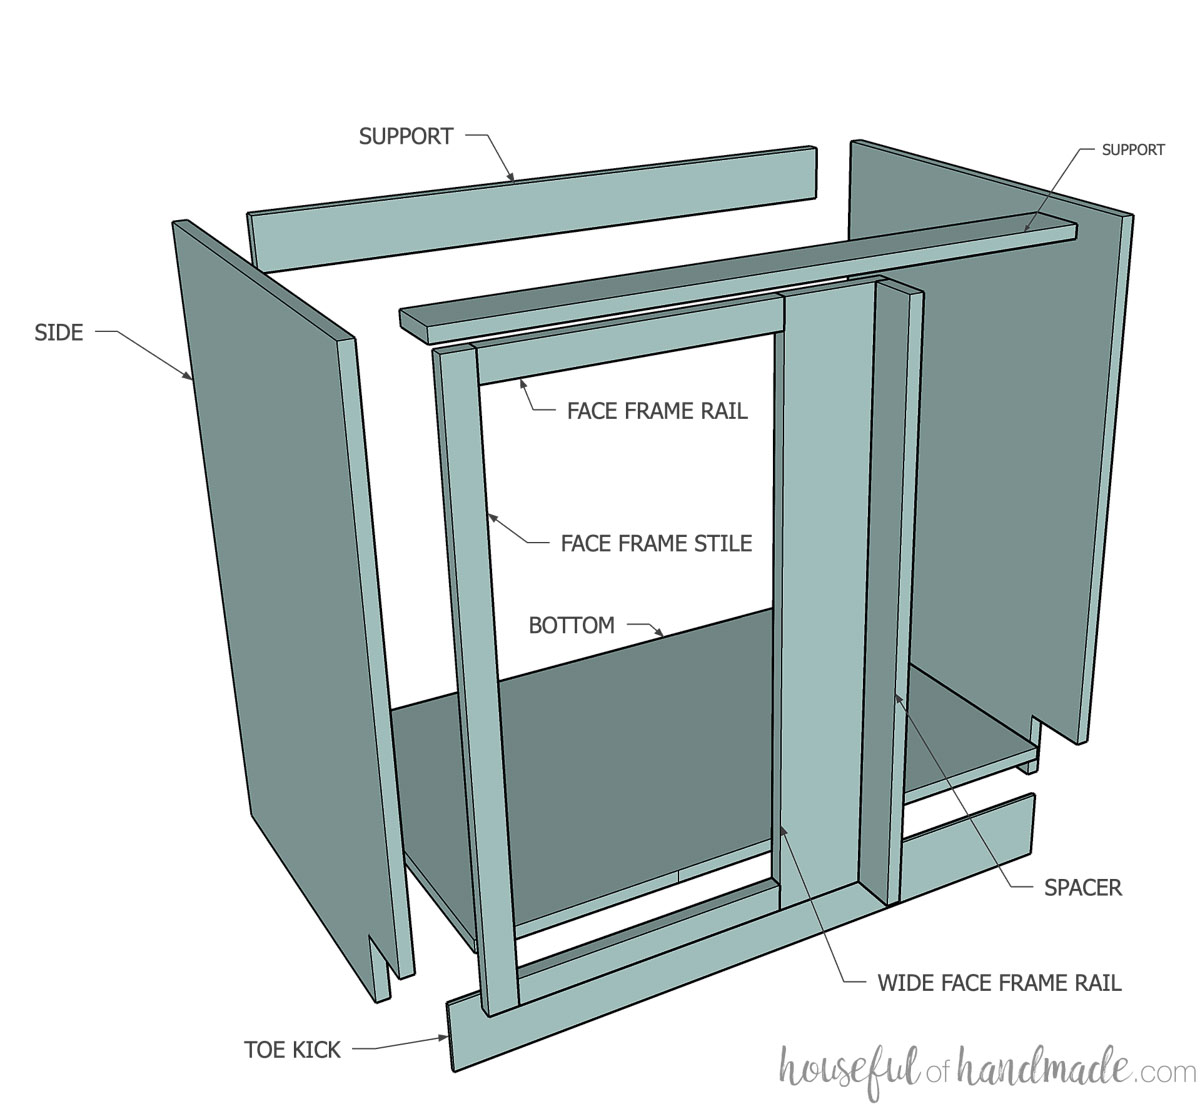 3D sketch of a blind corner cabinet with all the parts labeled.